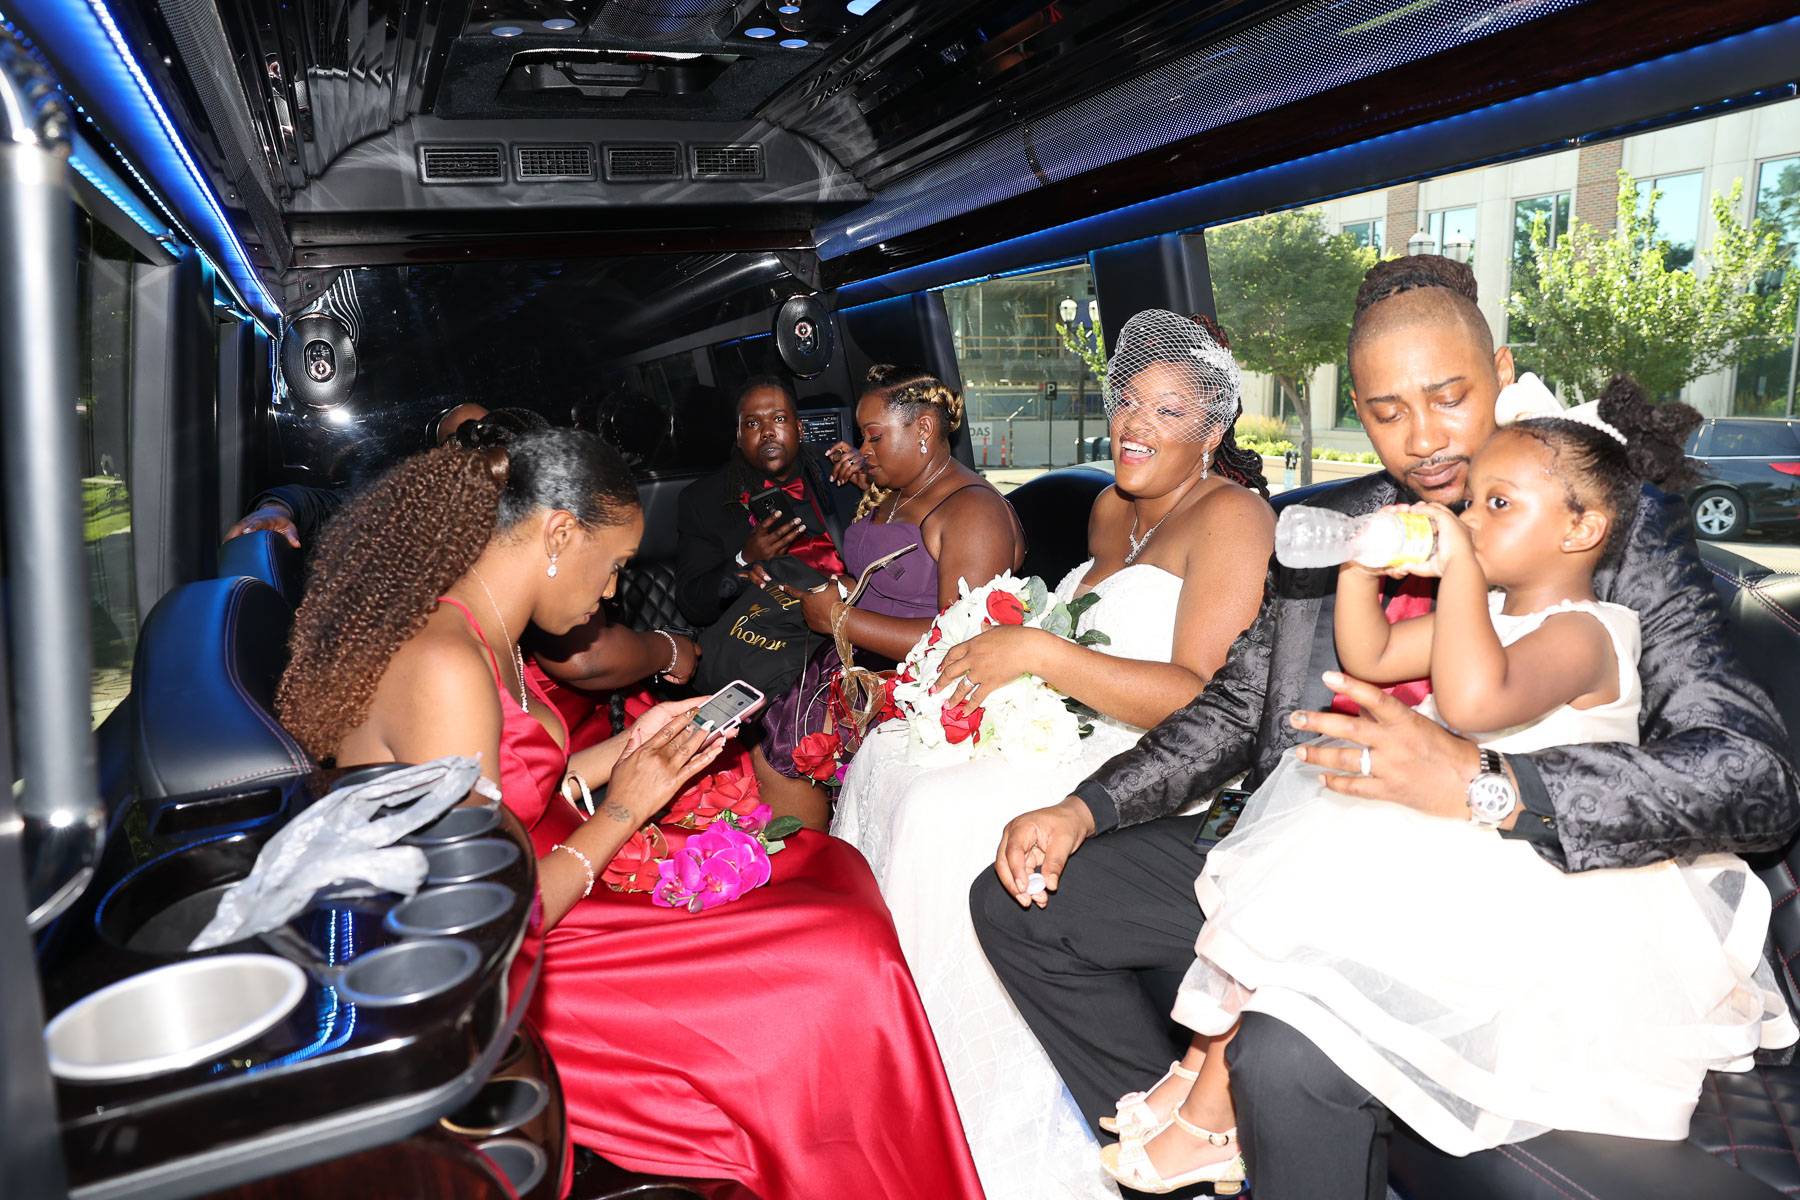 The newlyweds and their attendants inside a limo